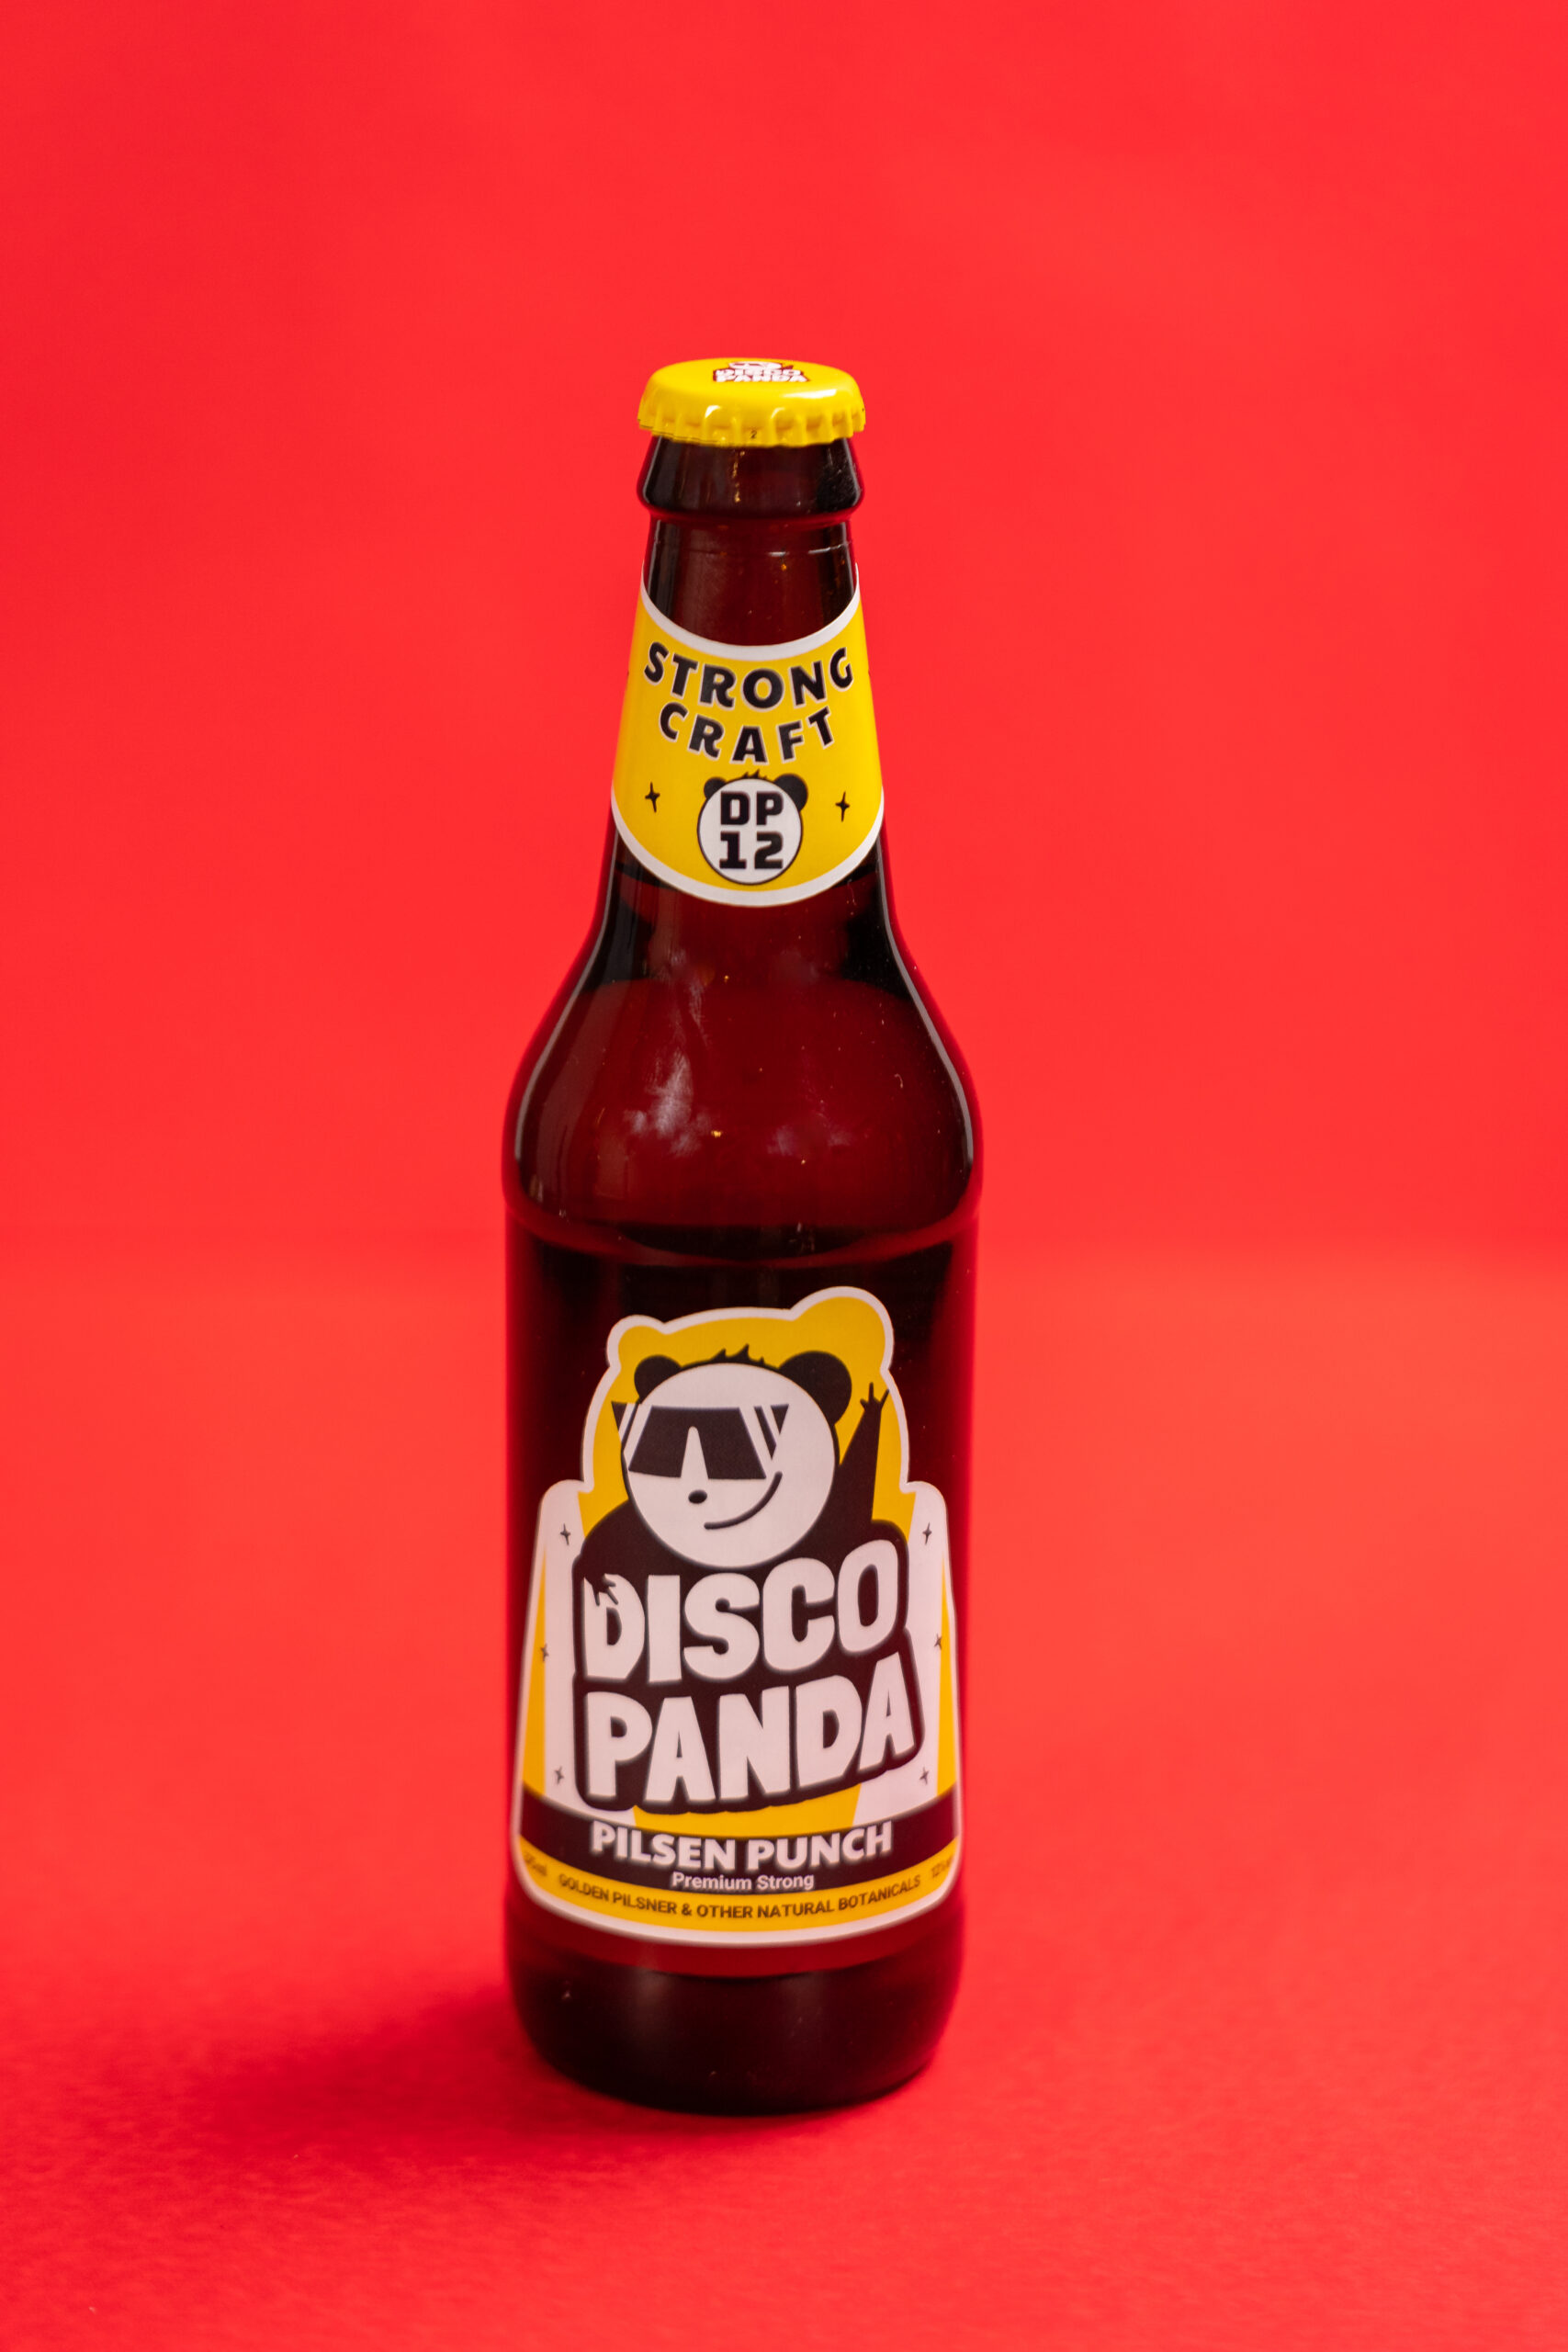 World of Brands launches a one-of-its-kind Strong Craft Product – Disco Panda